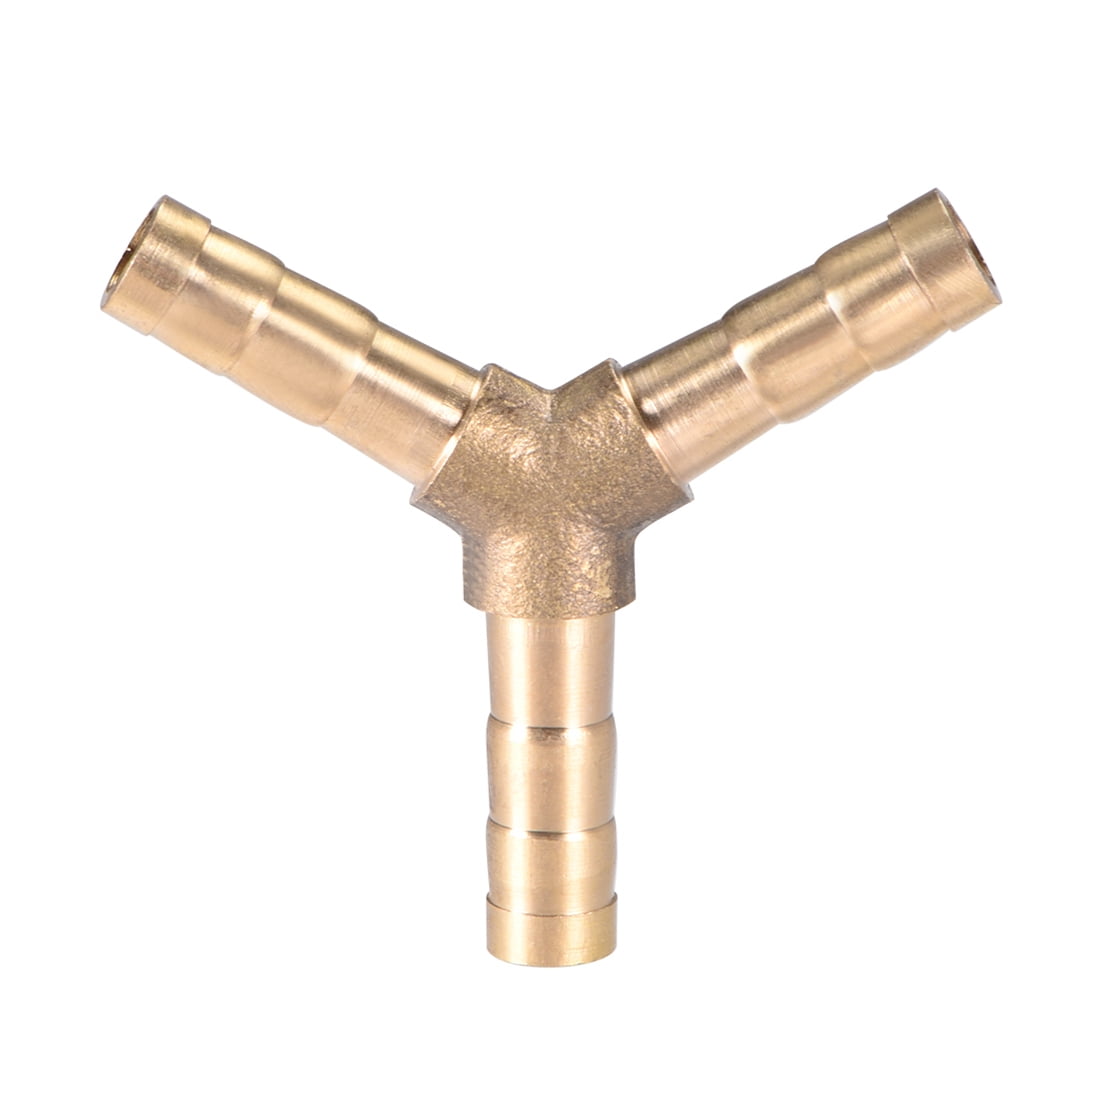 6mm 10mm 6mm Tee 3Way Hose Barb Brass Fitting Reducer Splicer Details about   1/4 X 3/8 X 1/4 